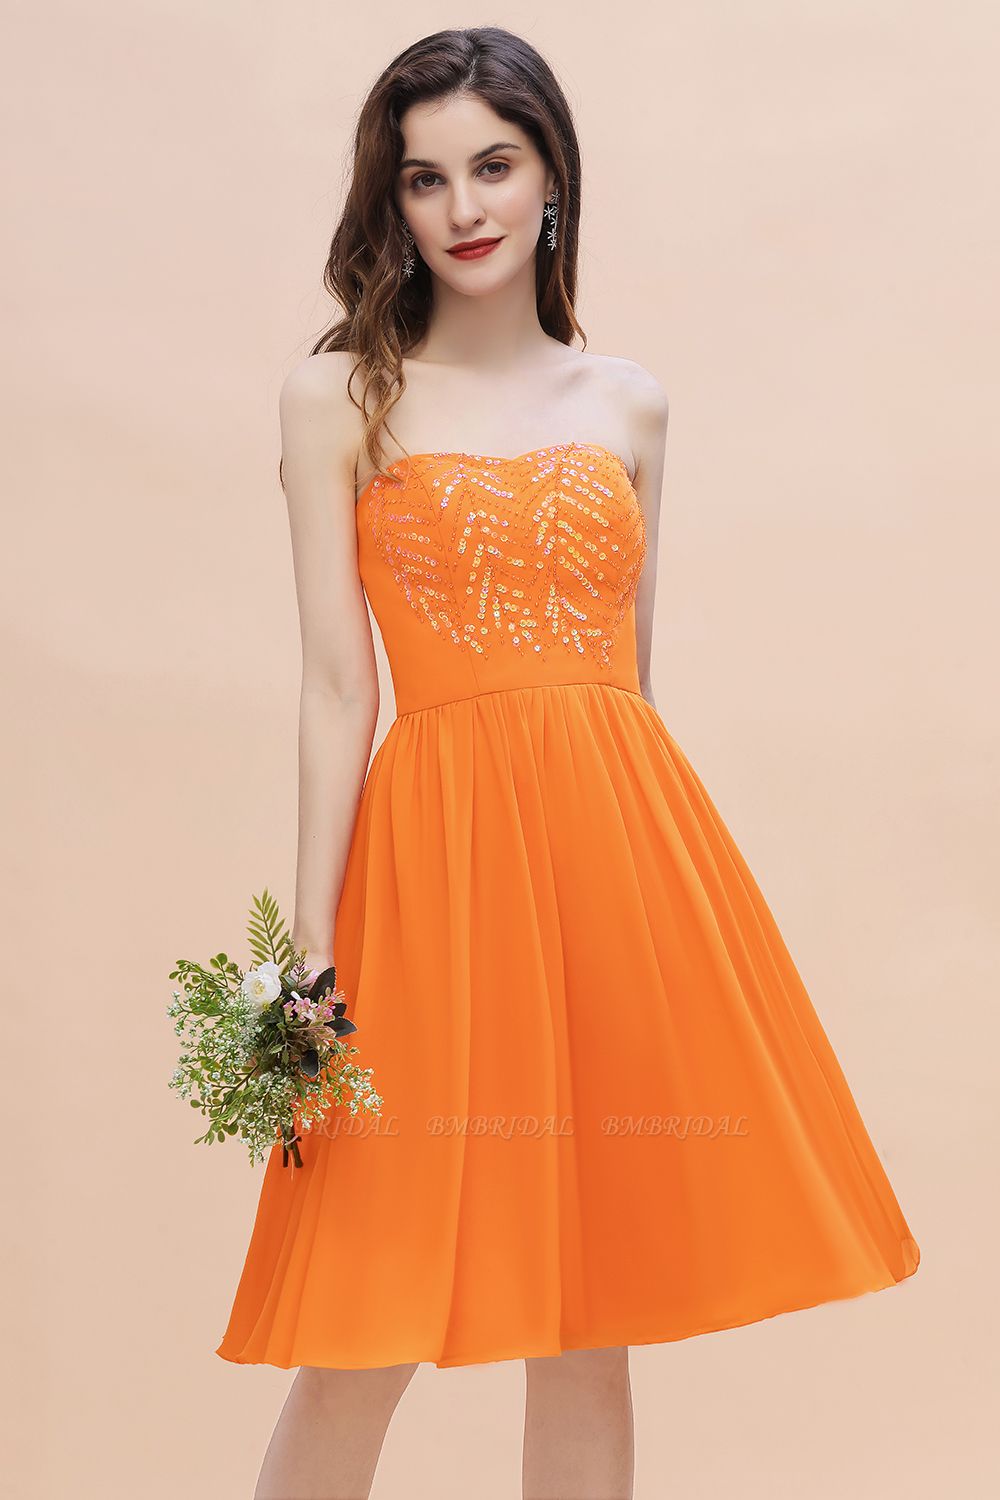 BMbridal Pretty Strapless Sweetheart Chiffon Sequins Short Bridesmaid Dress with Ruffles